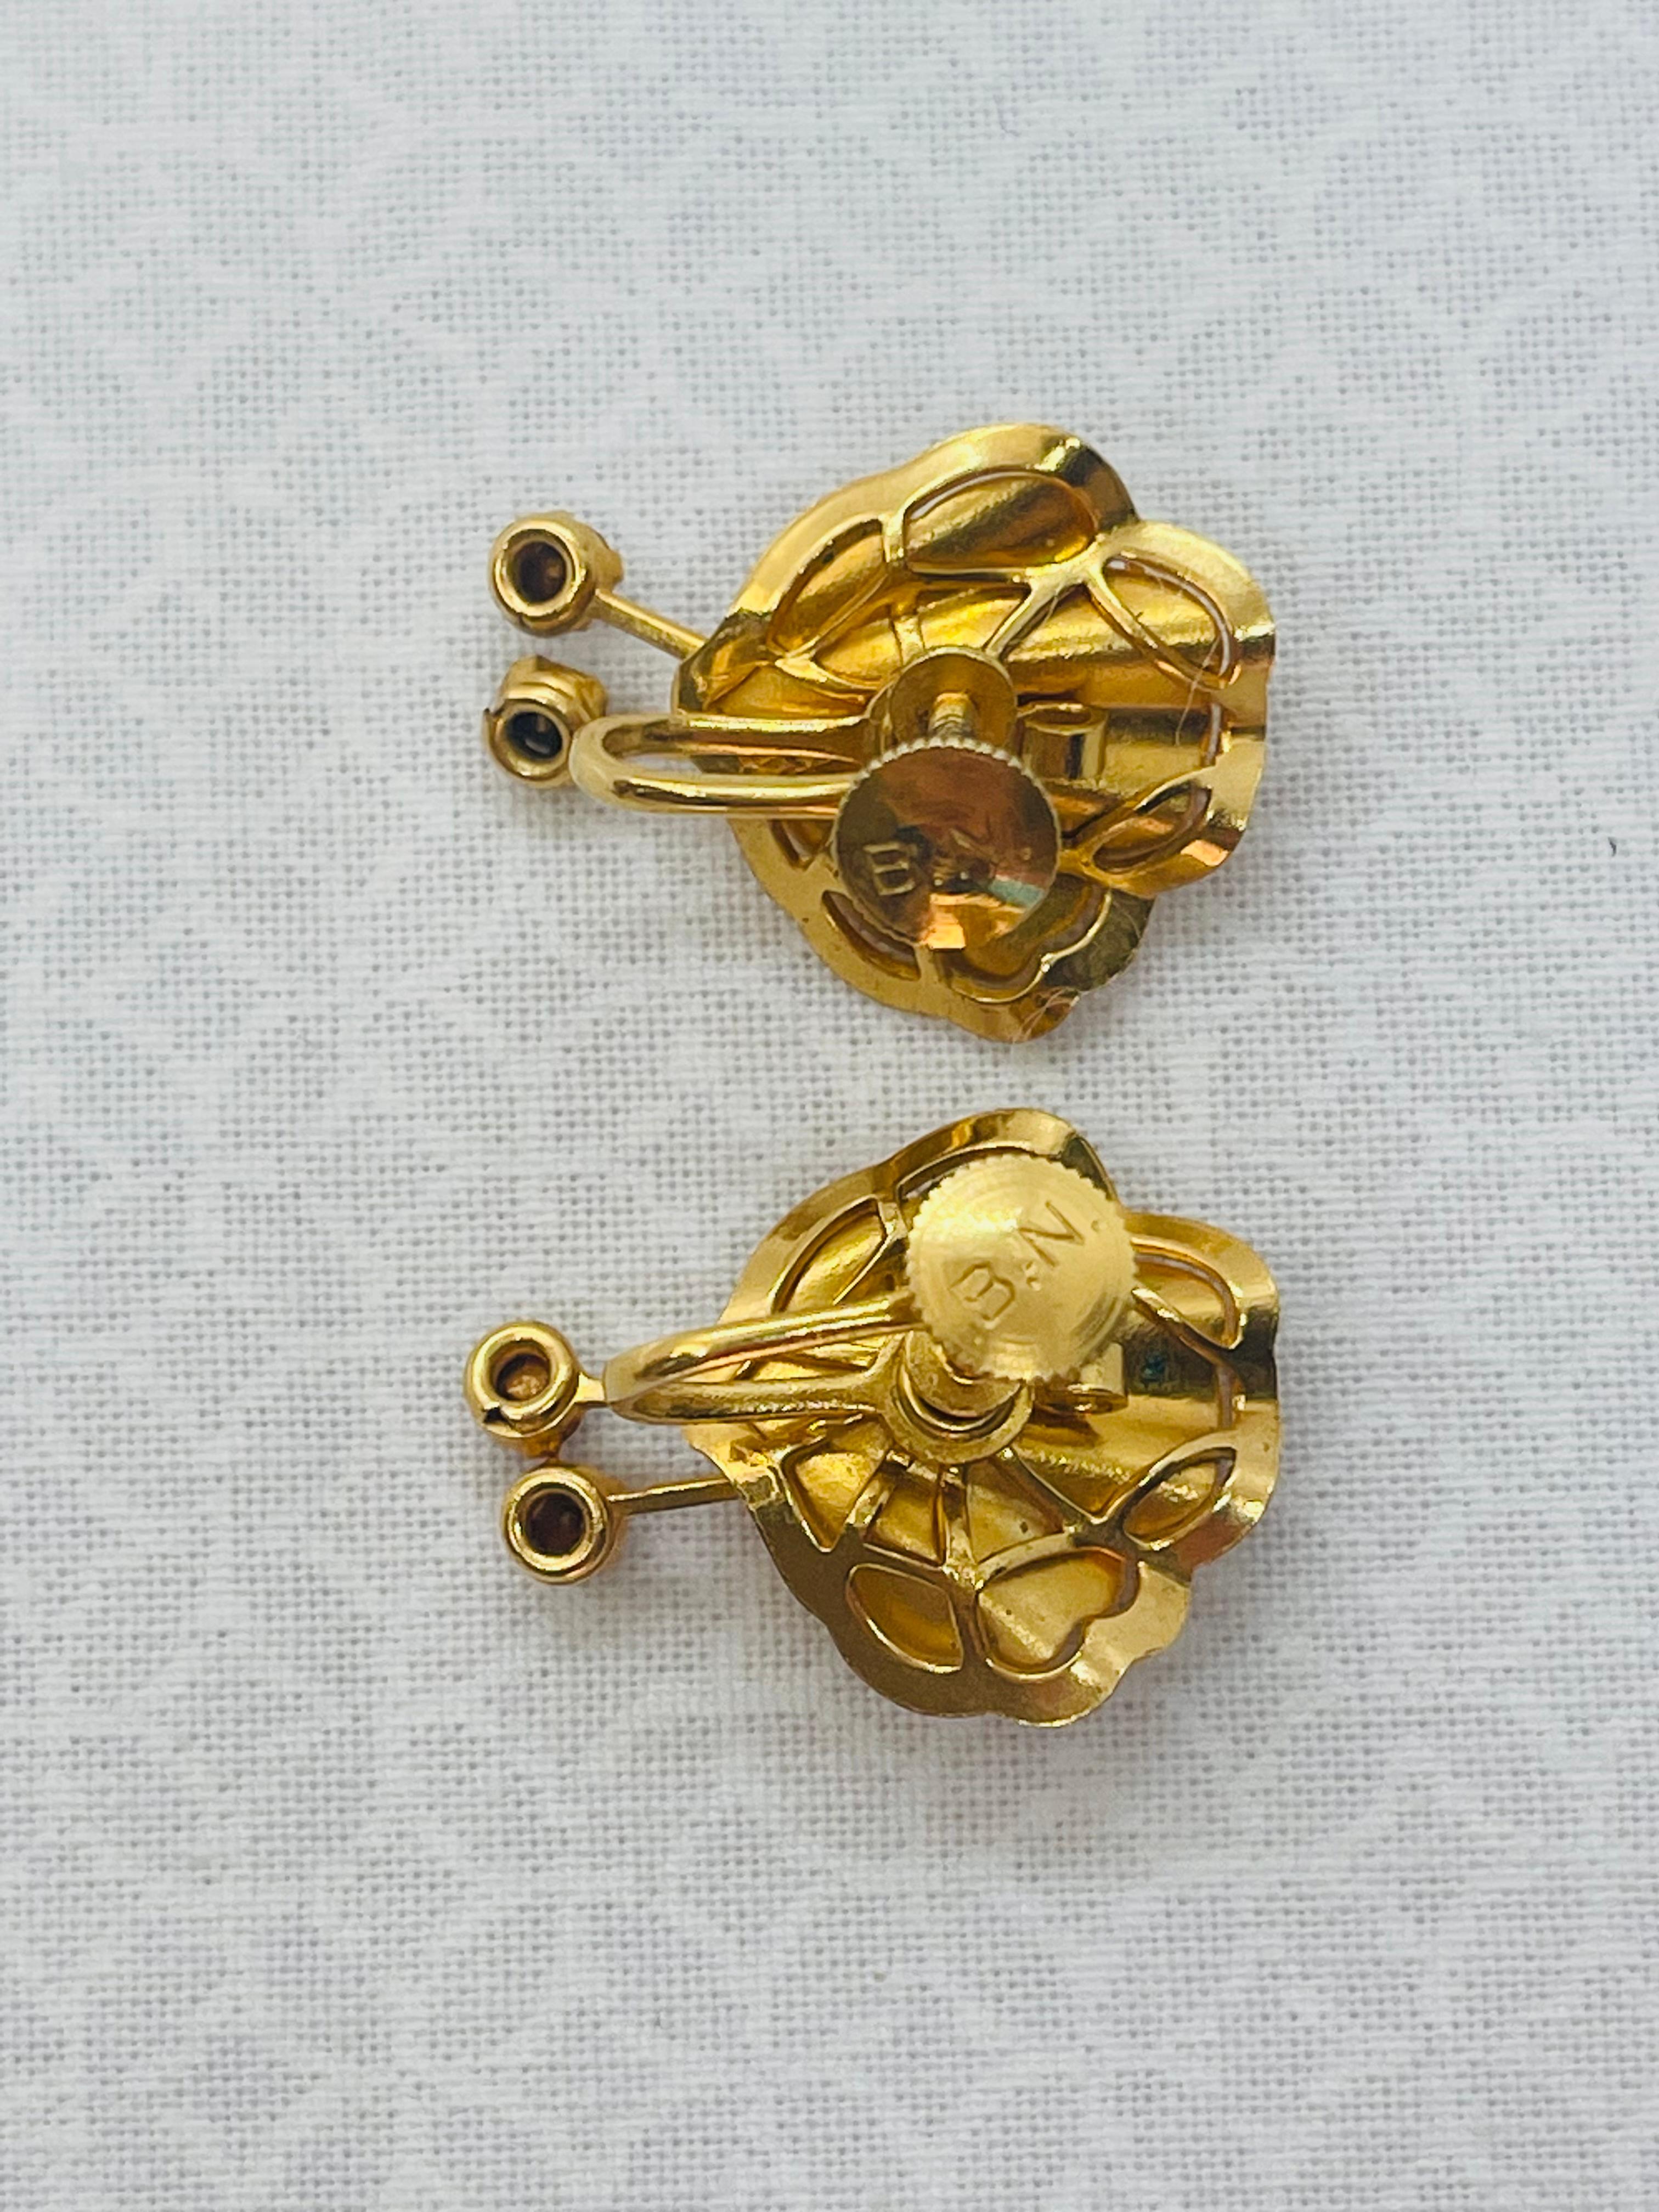 Women's Bugbee & Niles Matching Earrings and Brooch Set Circa. 1955s - 1959 For Sale